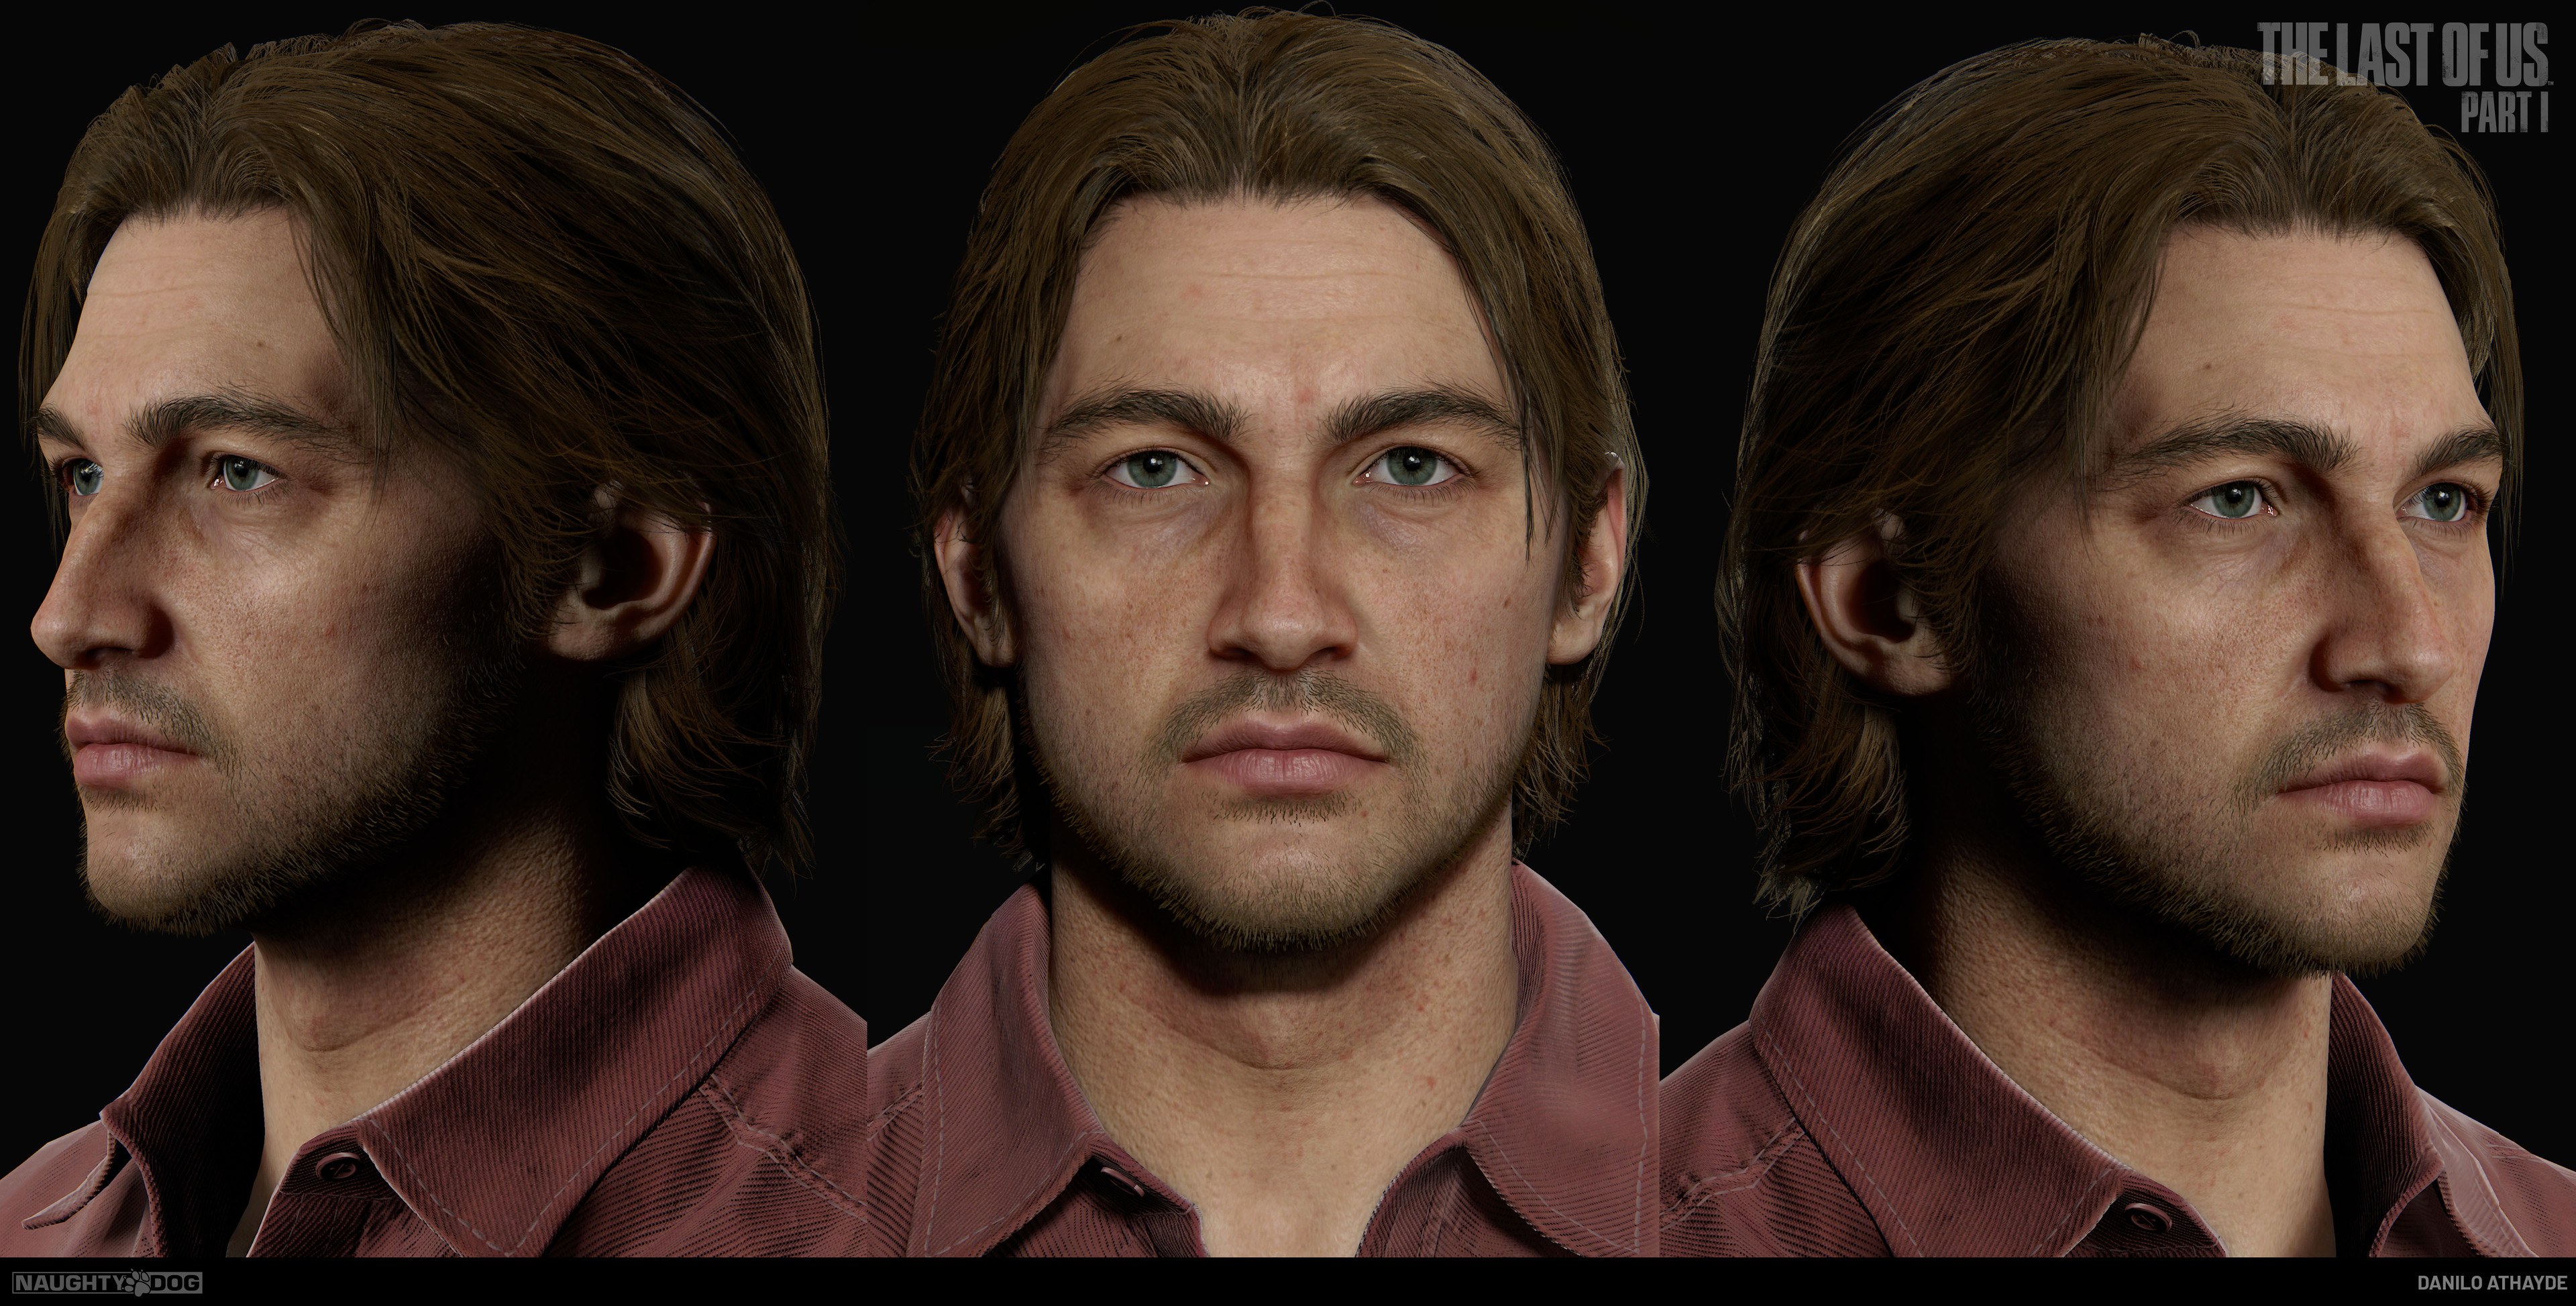 The Last of Us': Who Is Tommy? How Tommy Differs in the Game